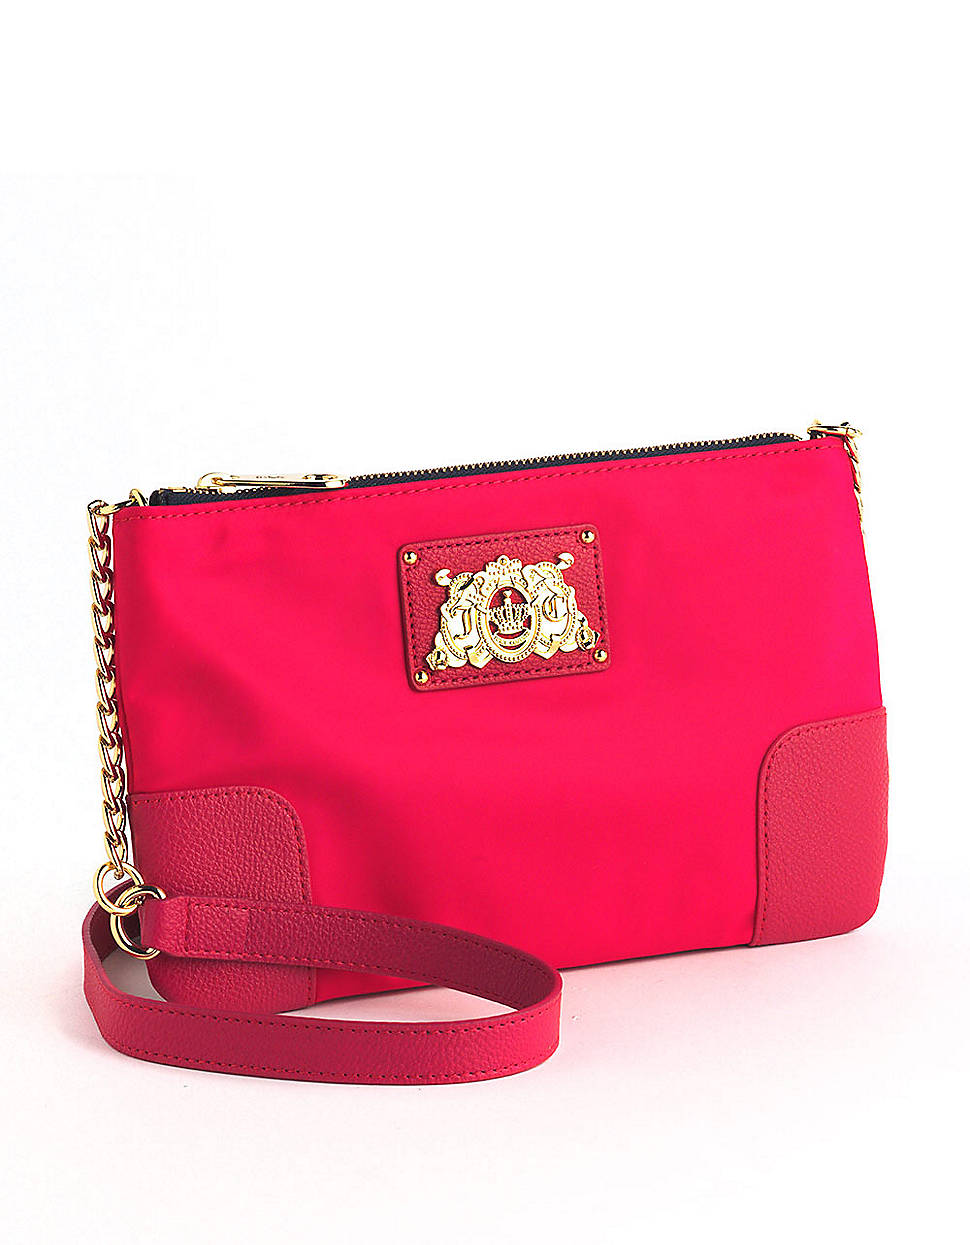 Lyst - Juicy couture Lou Lou Leather Crossbody Bag in Pink